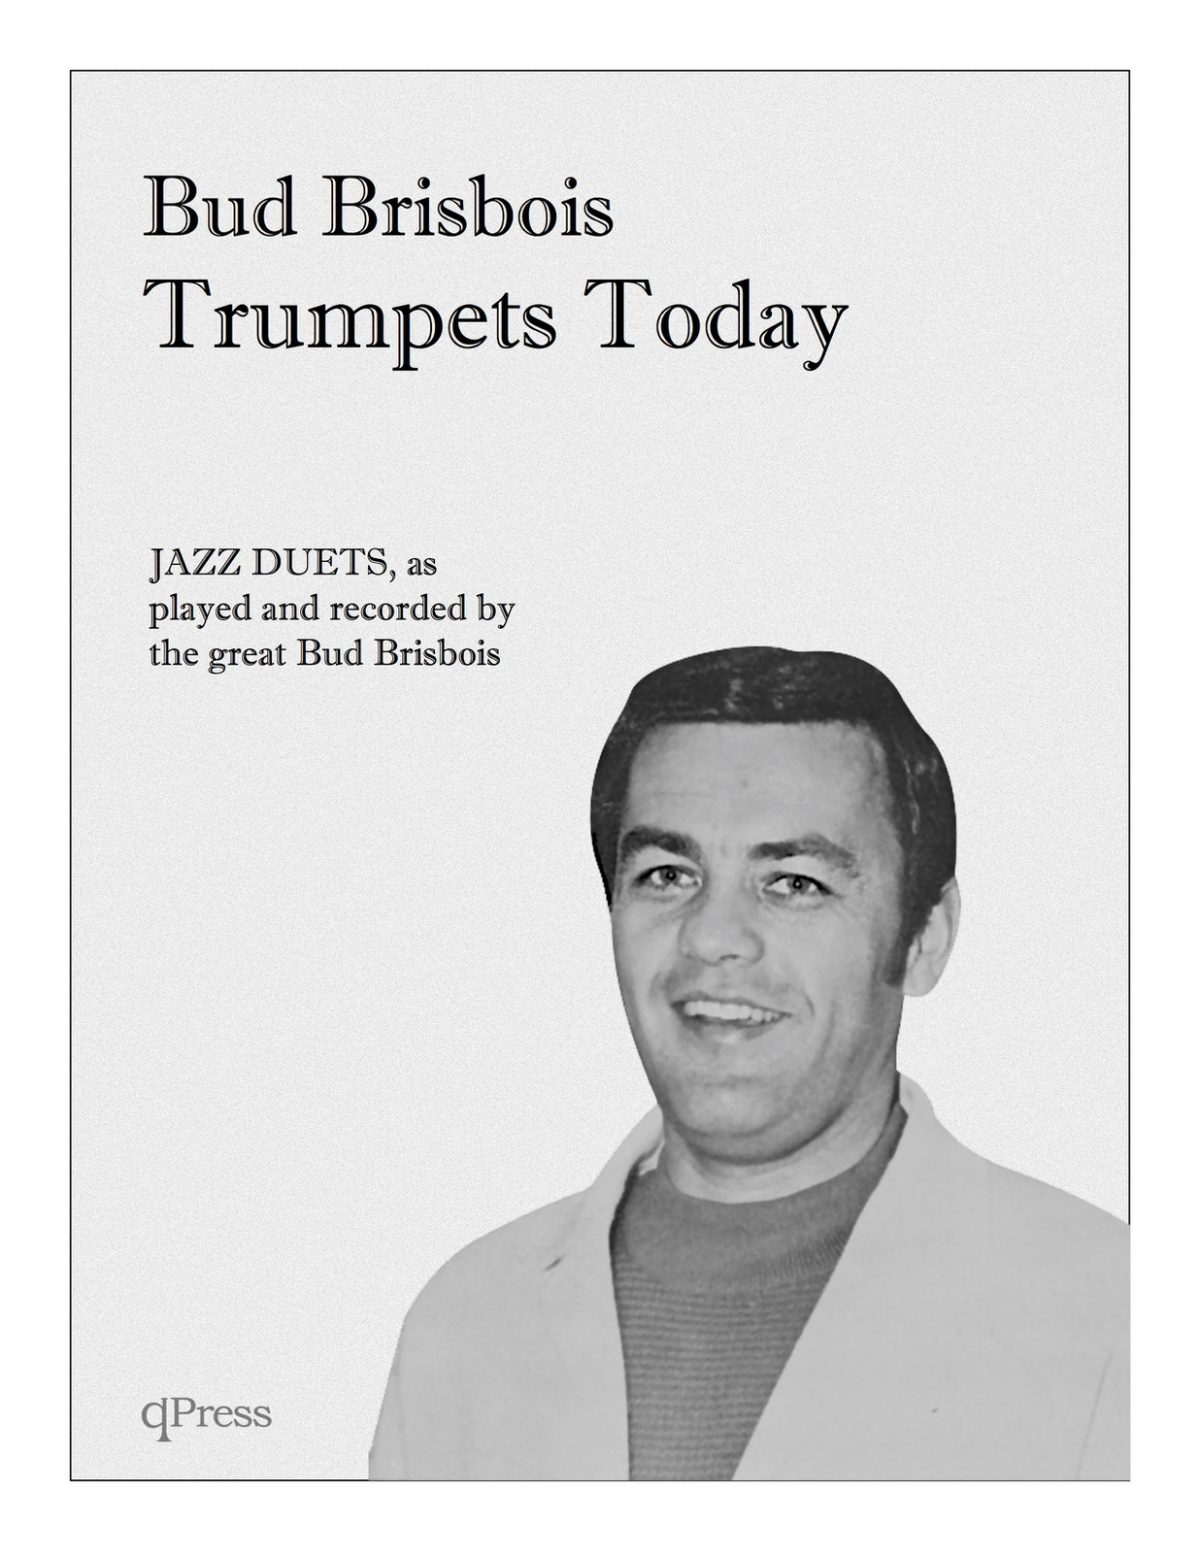 Trumpets Today, Jazz Duets